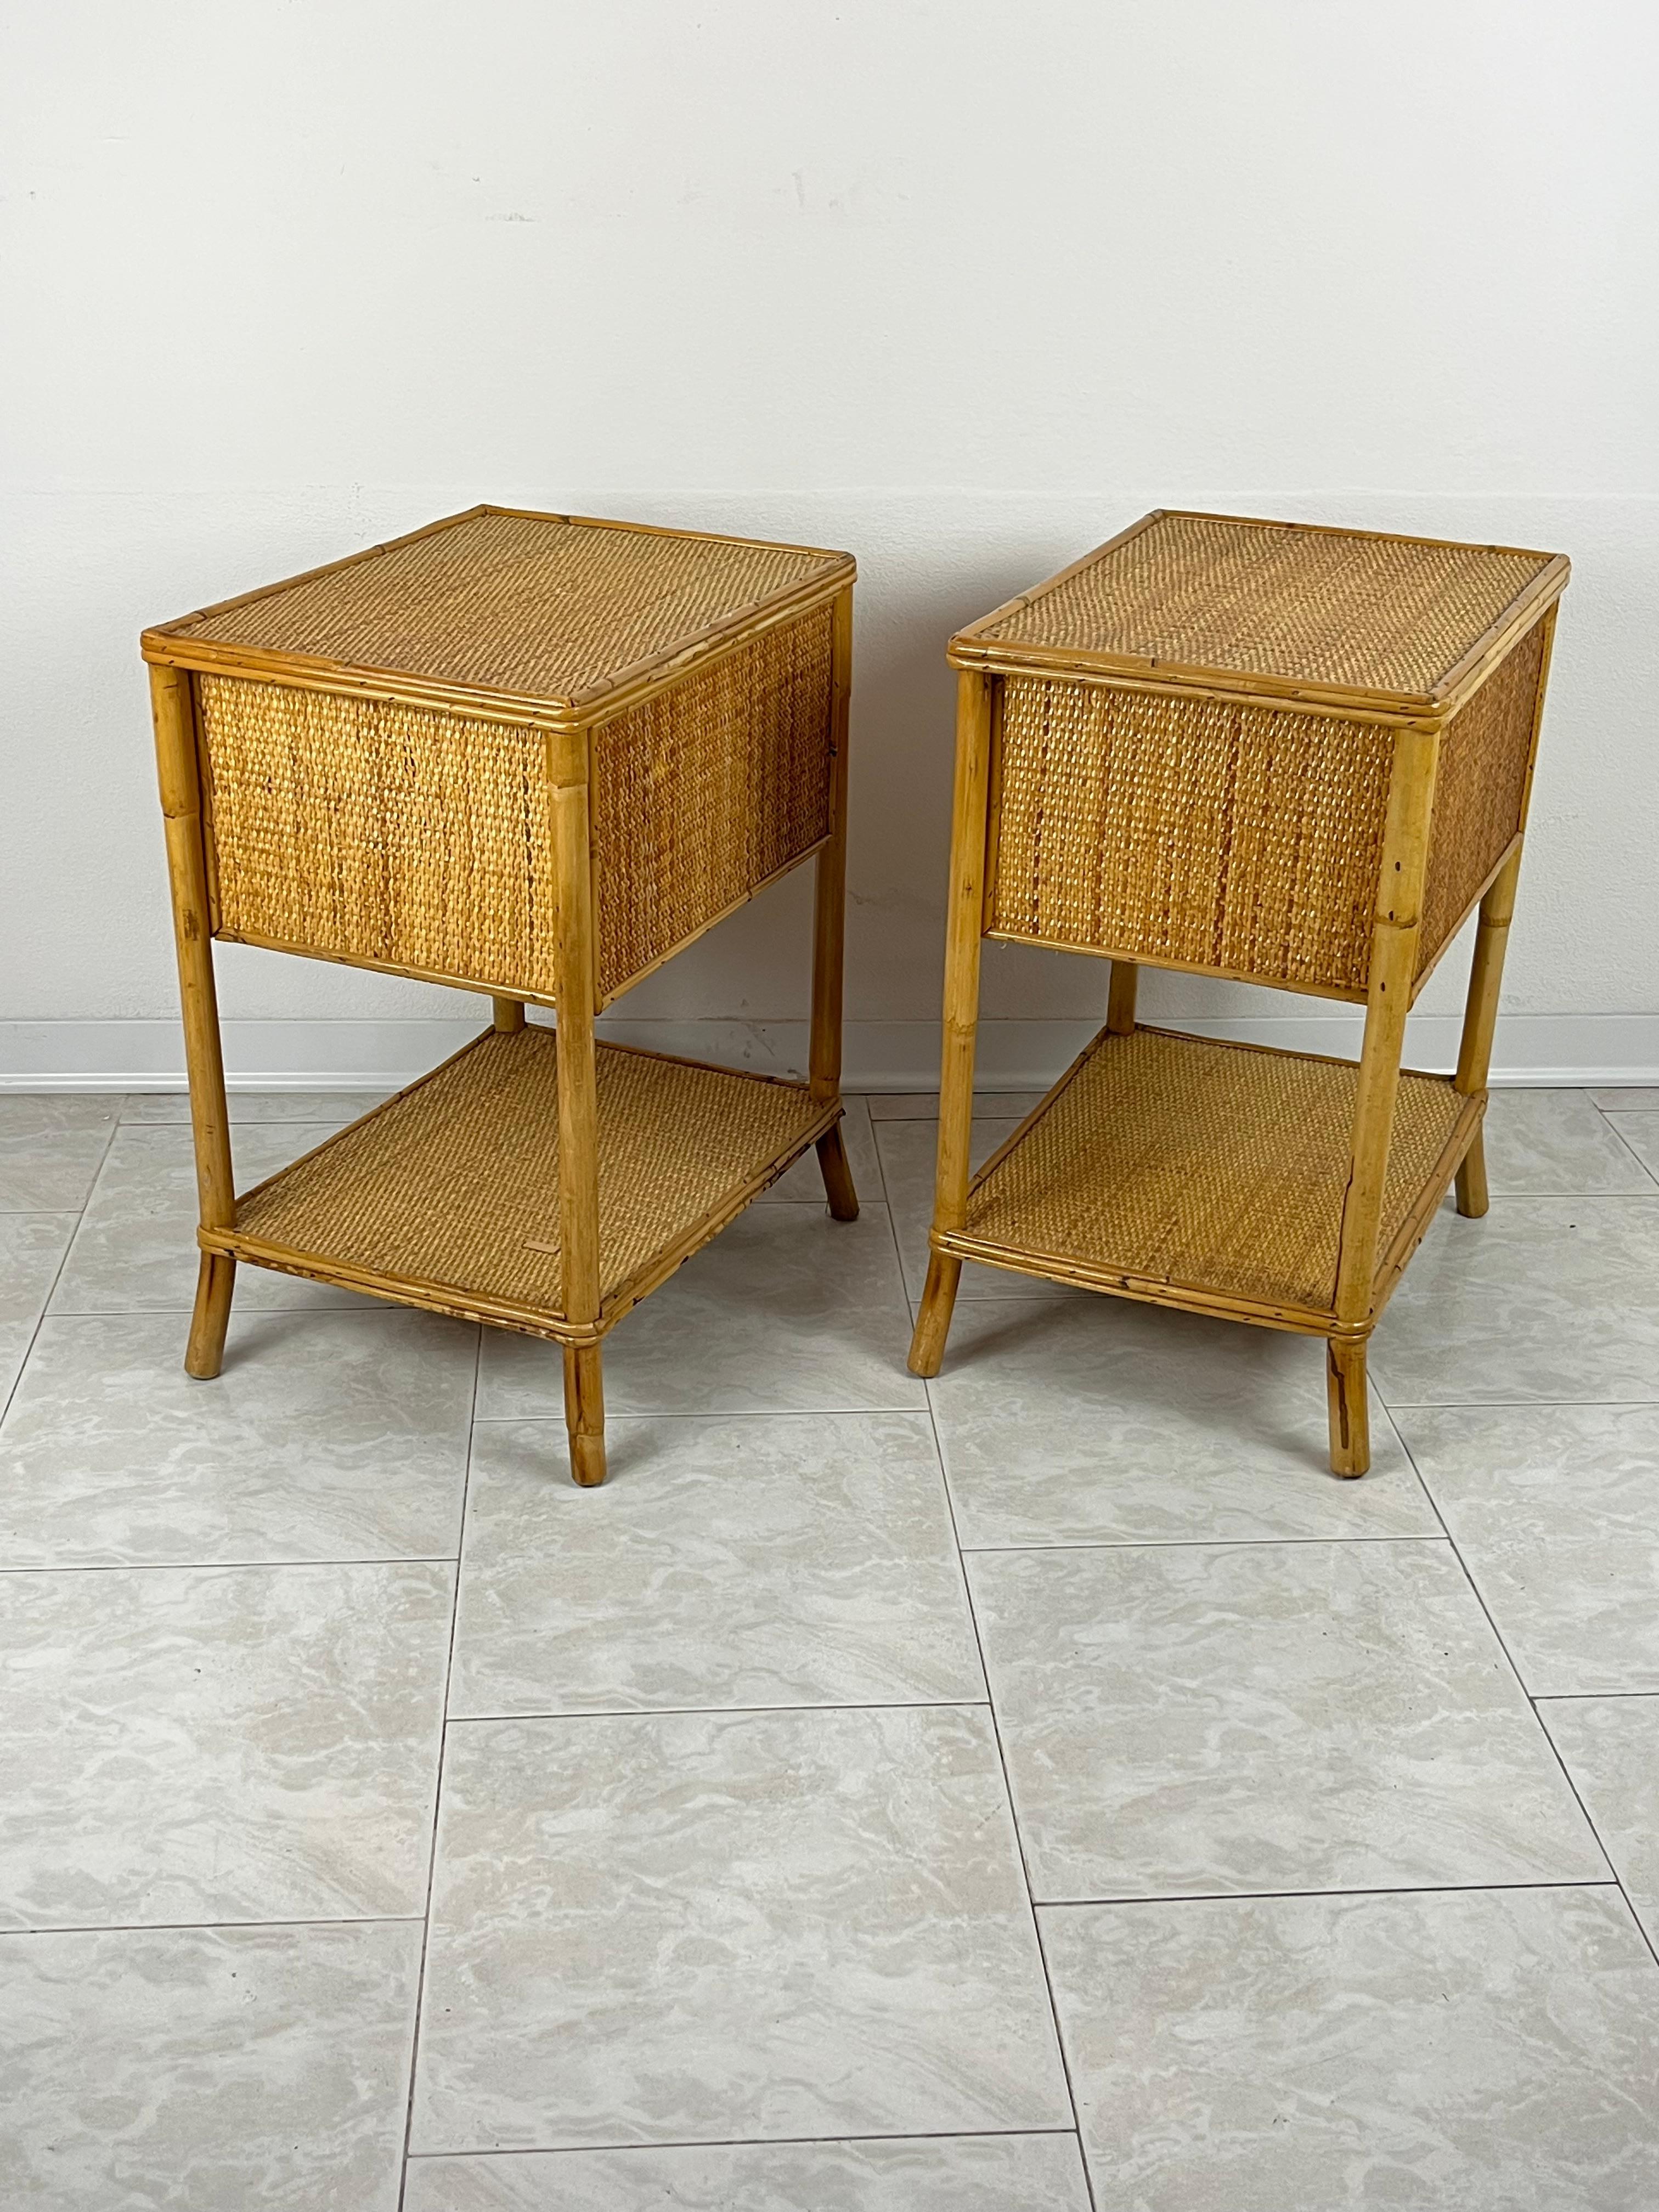 Pair of Vintage Italian Bamboo and Rattan Bedside Tables 1970s For Sale 1